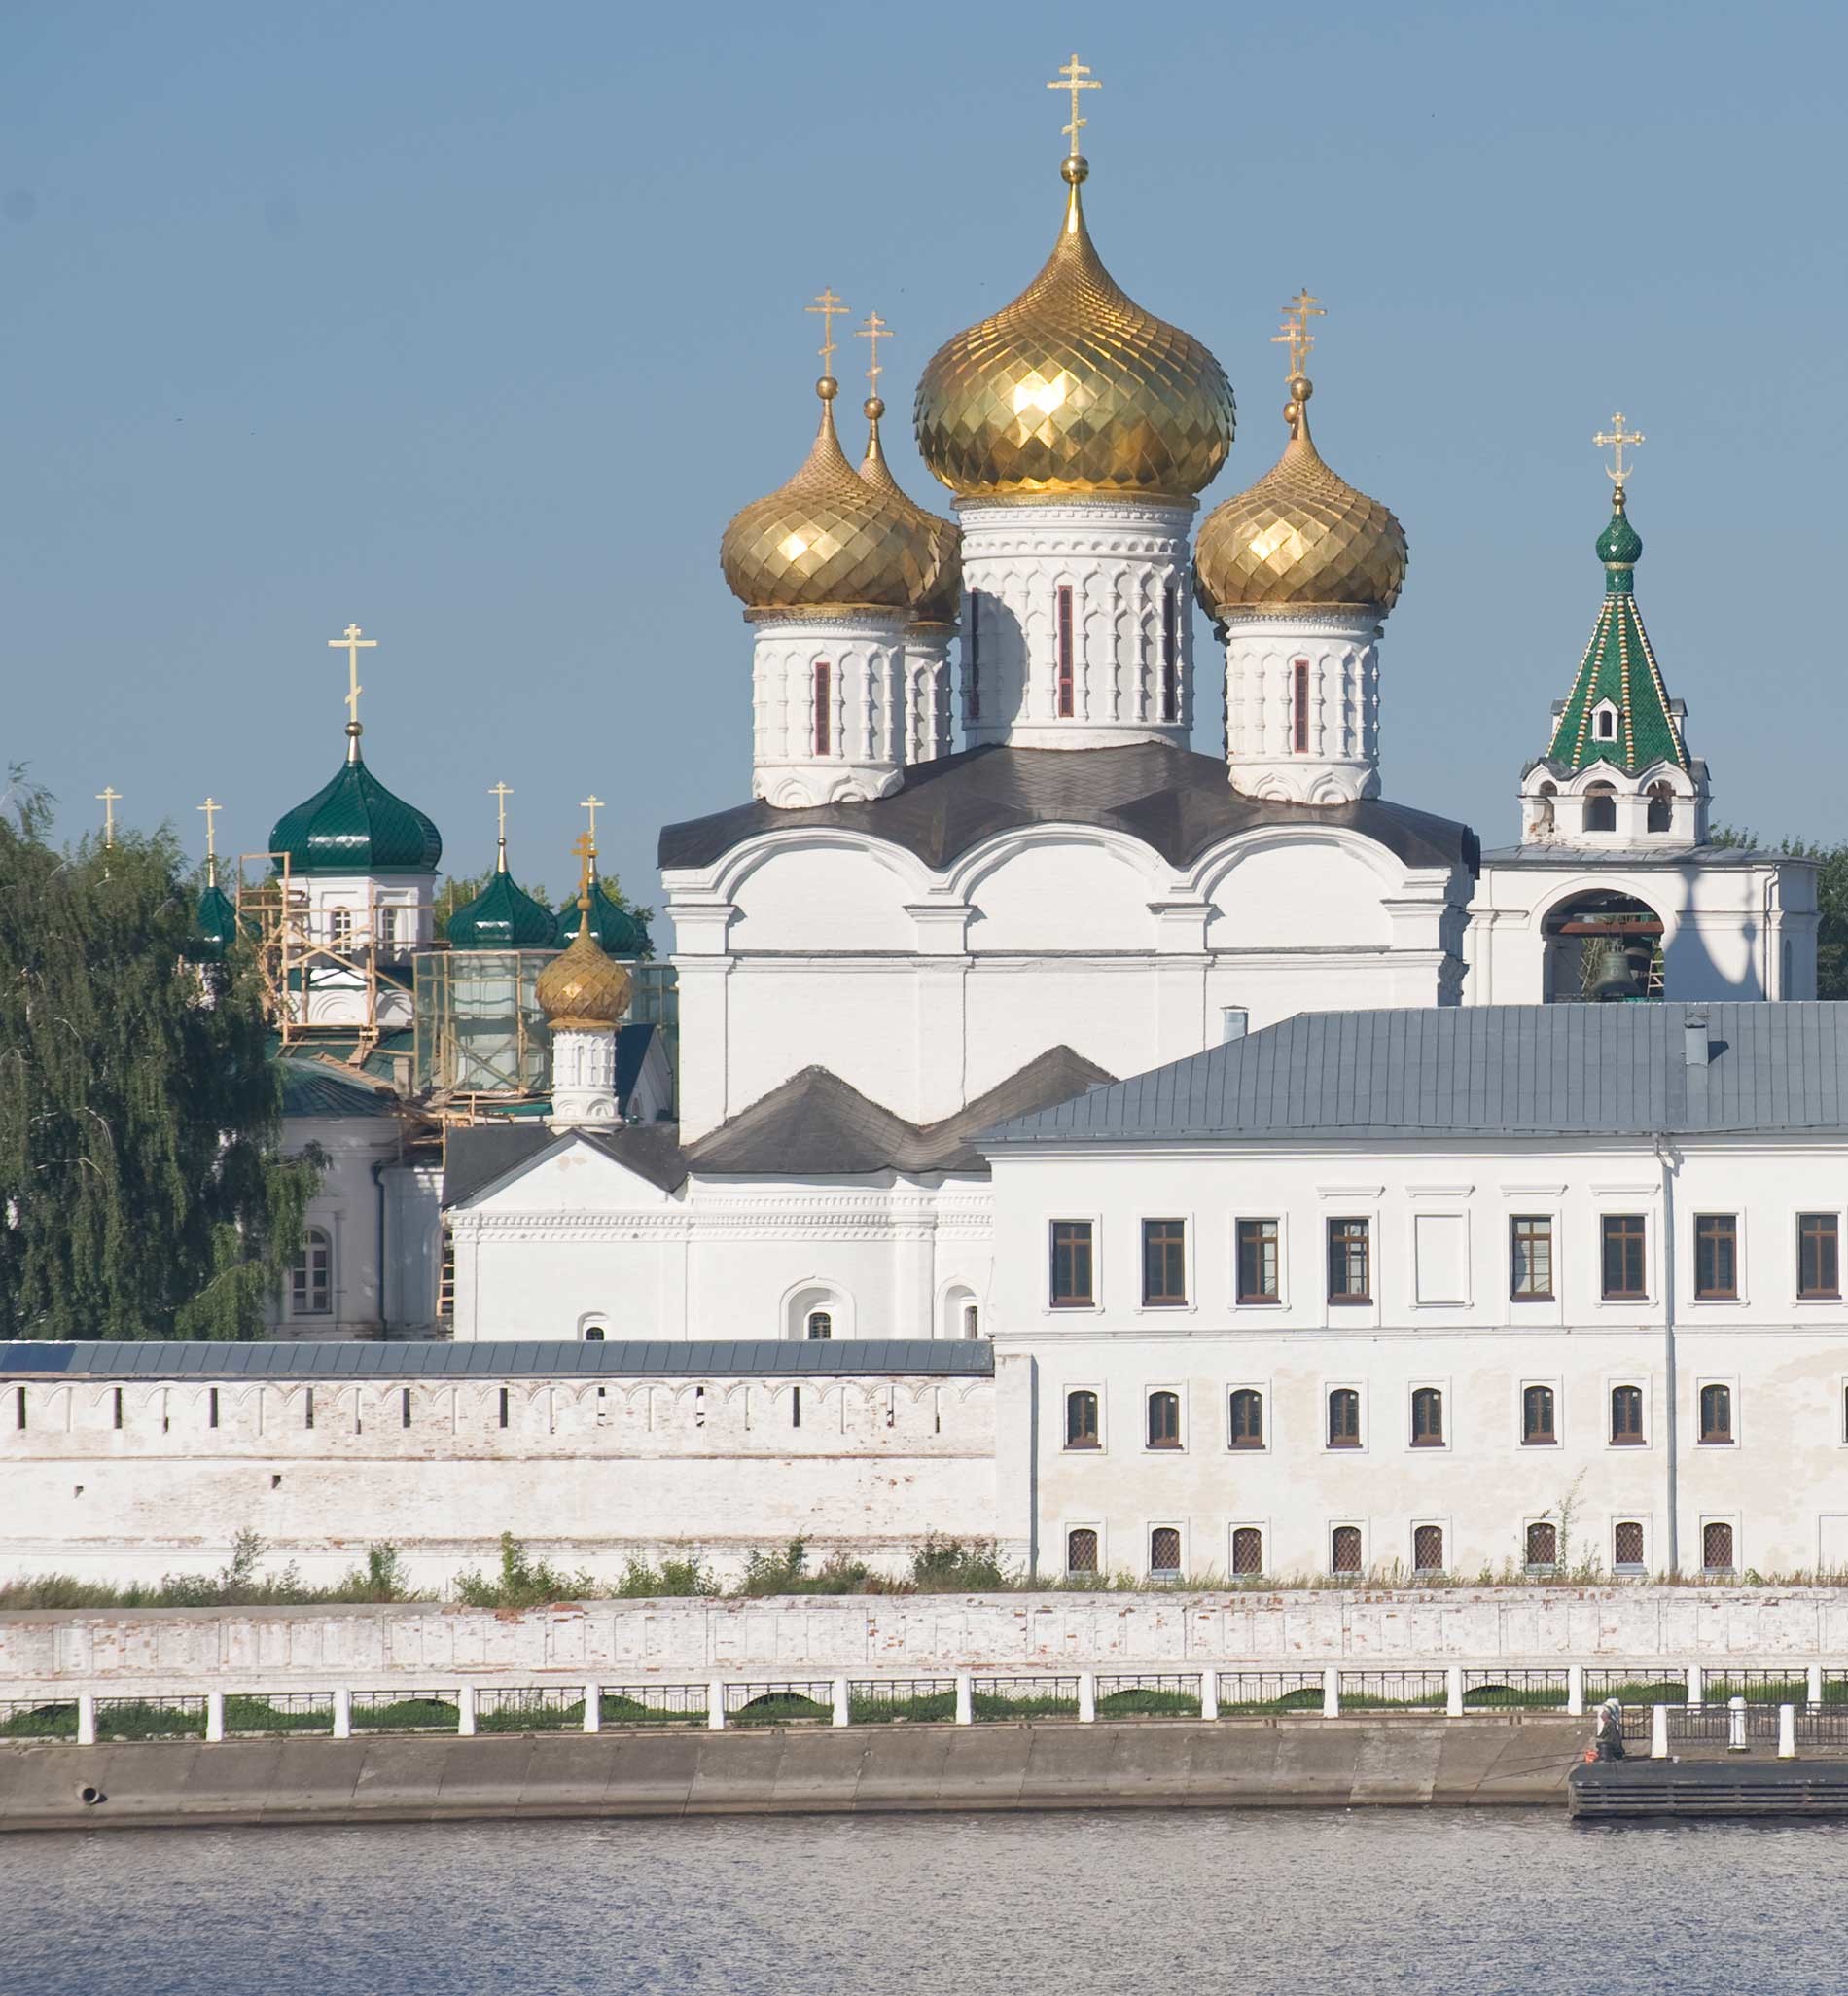 Trinity-Ipatiev Monastery. From left: Cathedral of Nativity of the Virgin; Trinity Cathedral; bell tower. East view across Kostroma River. Aug. 13, 2017.